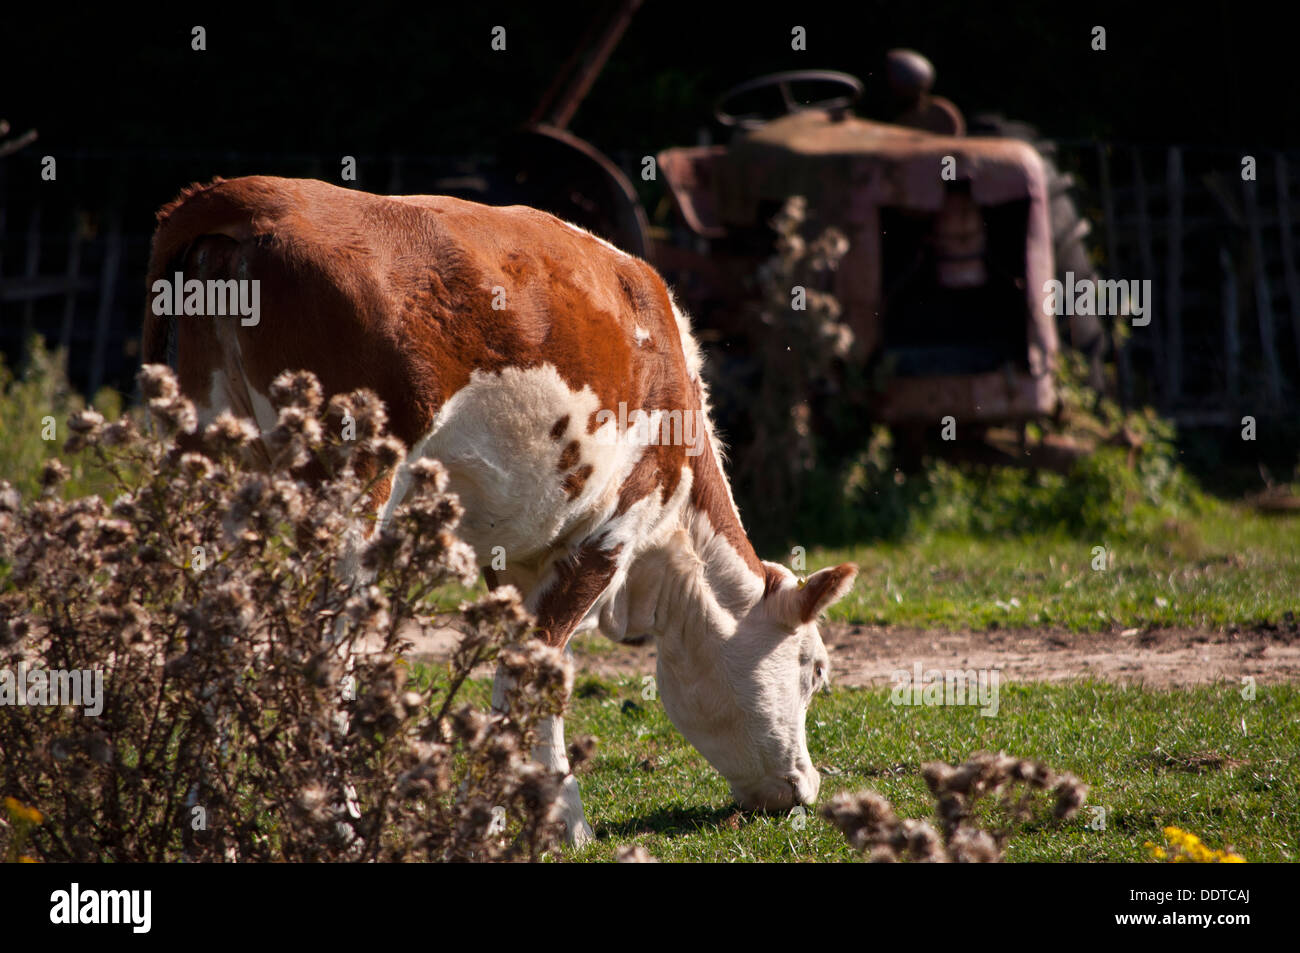 Cow graving with old farm tractor Stock Photo